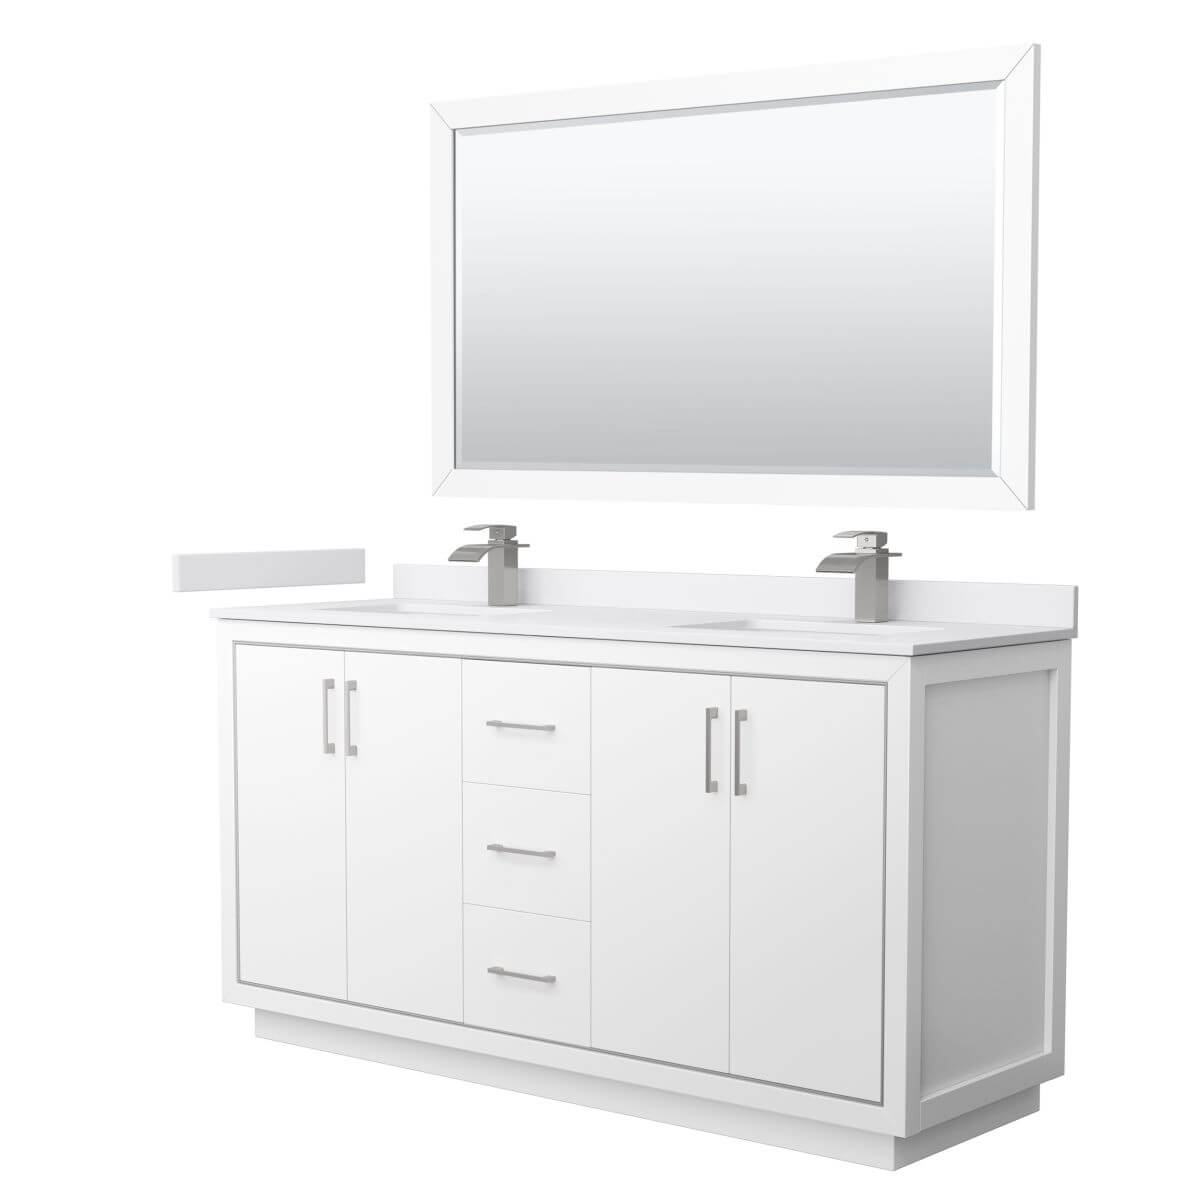 Wyndham Collection WCF111166DWHWCUNSM58 Icon 66 inch Double Bathroom Vanity in White with White Cultured Marble Countertop, Undermount Square Sinks, Brushed Nickel Trim and 58 Inch Mirror